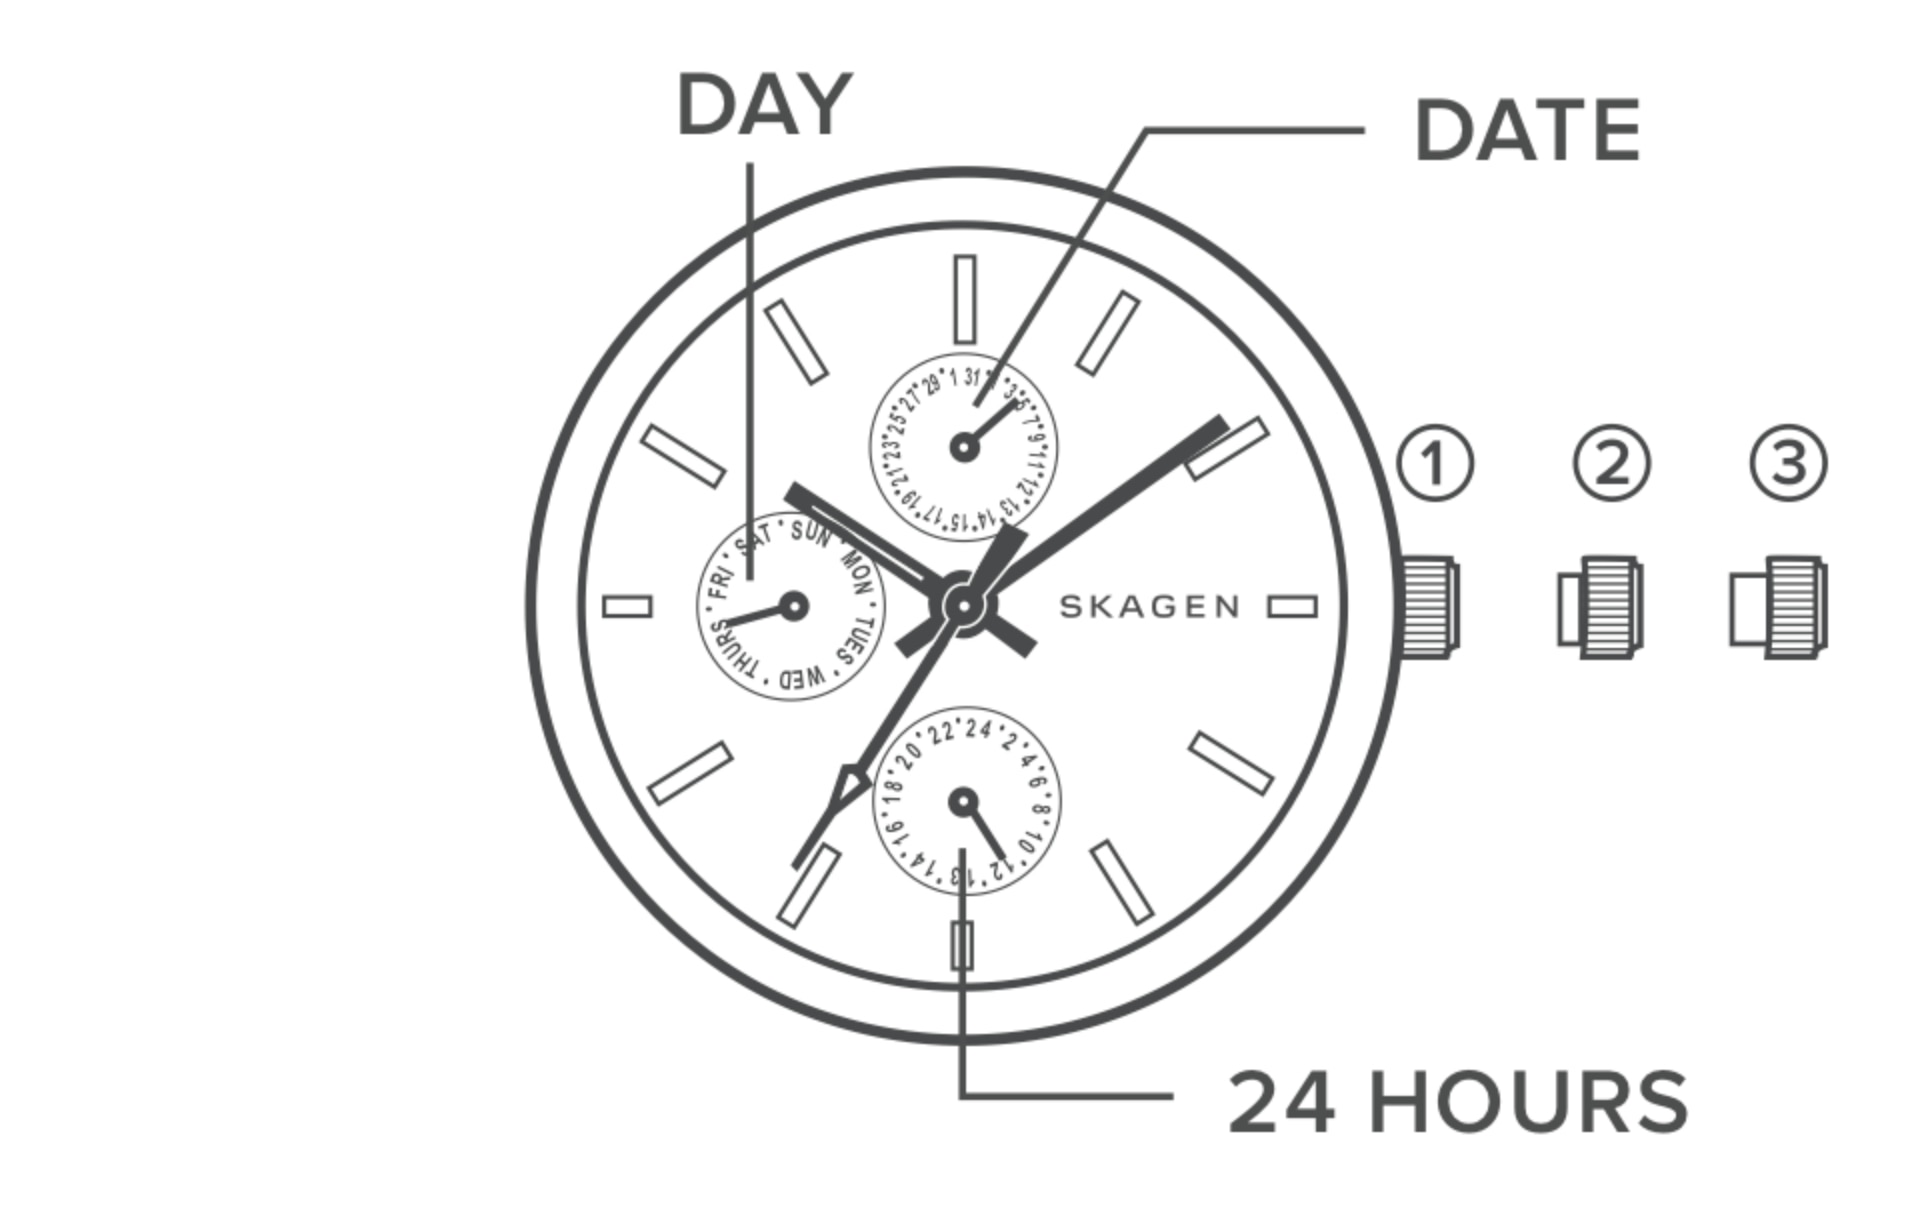 line art of a multifunction watch dial, identifying the crown, day, date and 24 hour hand.